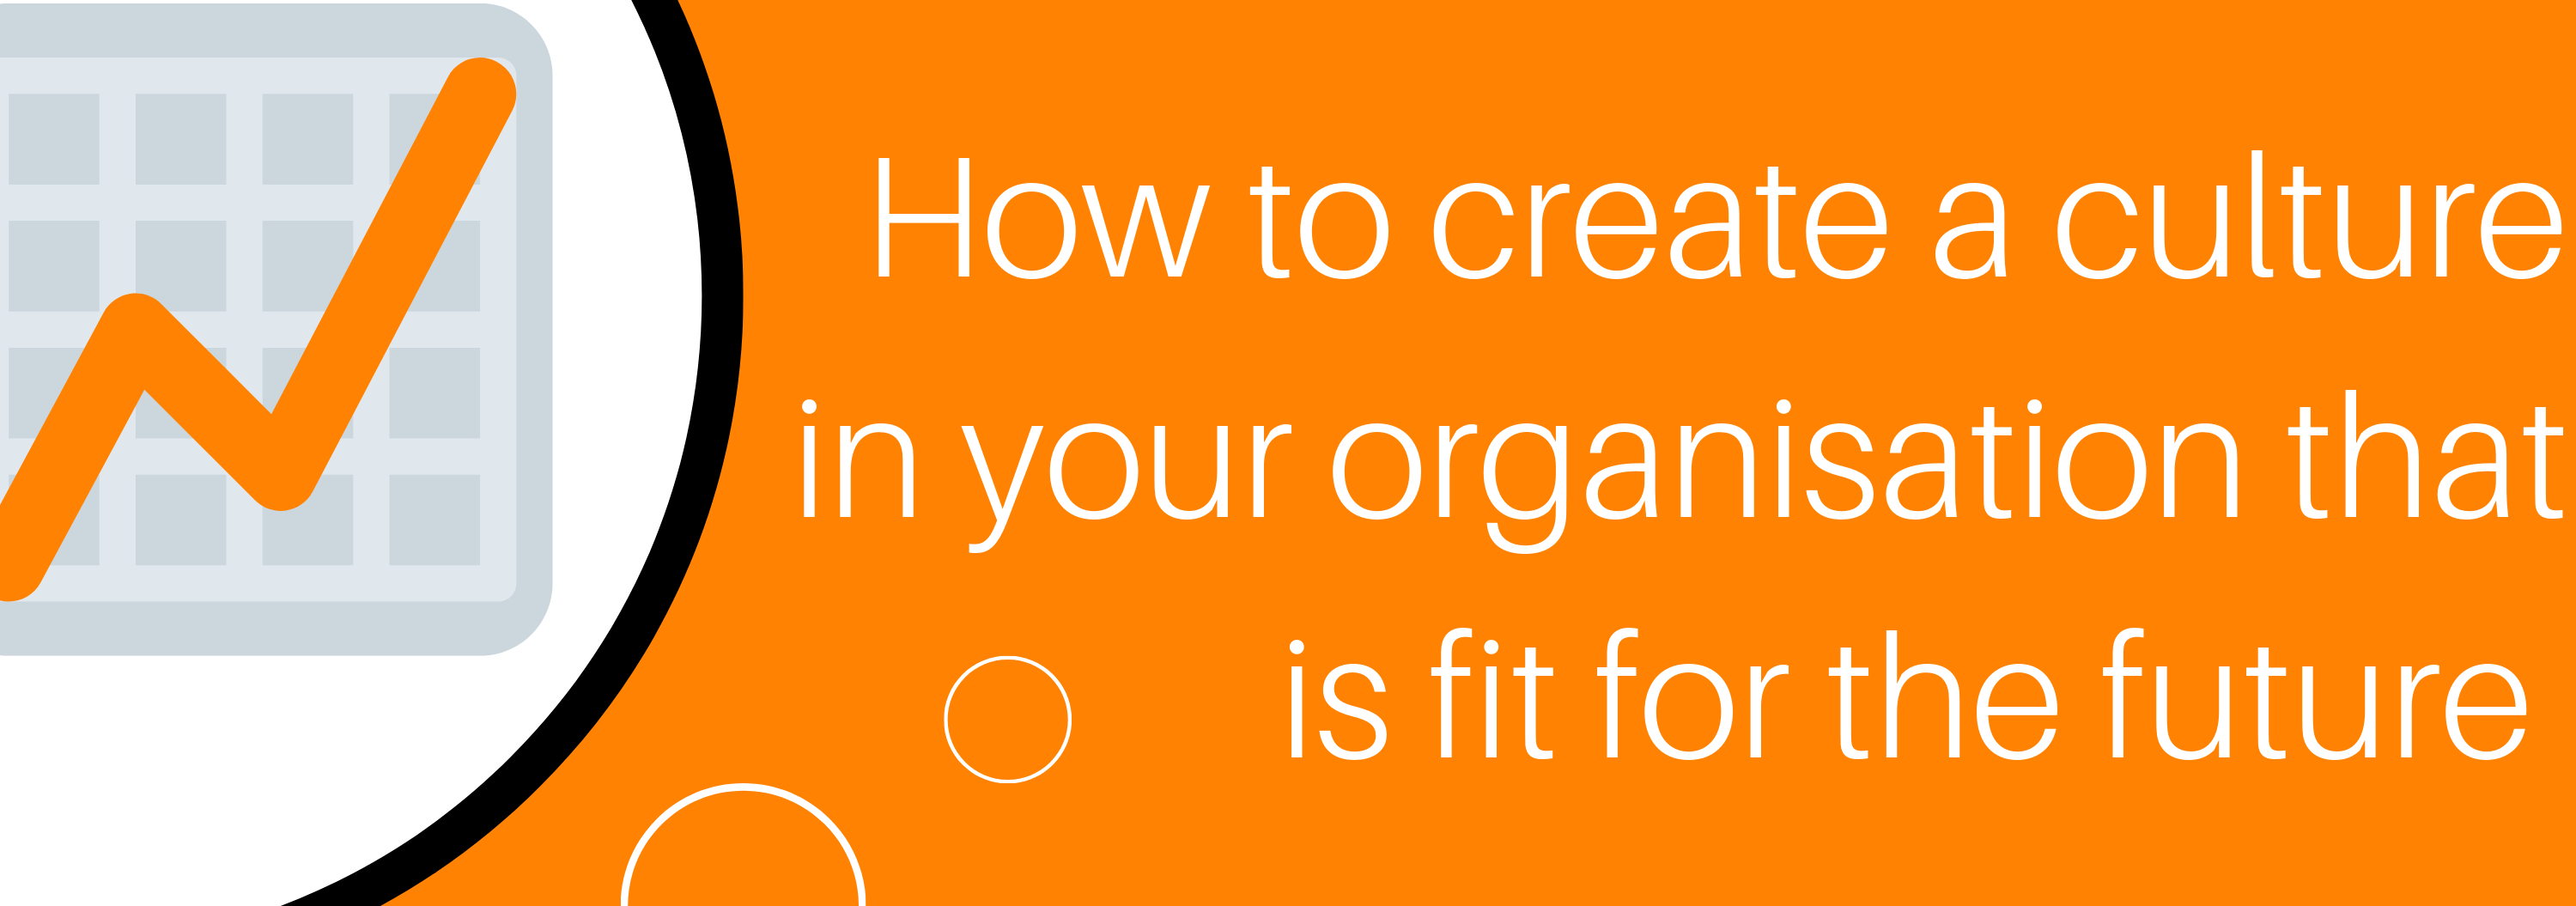 How to create a culture in your organisation fit for the future